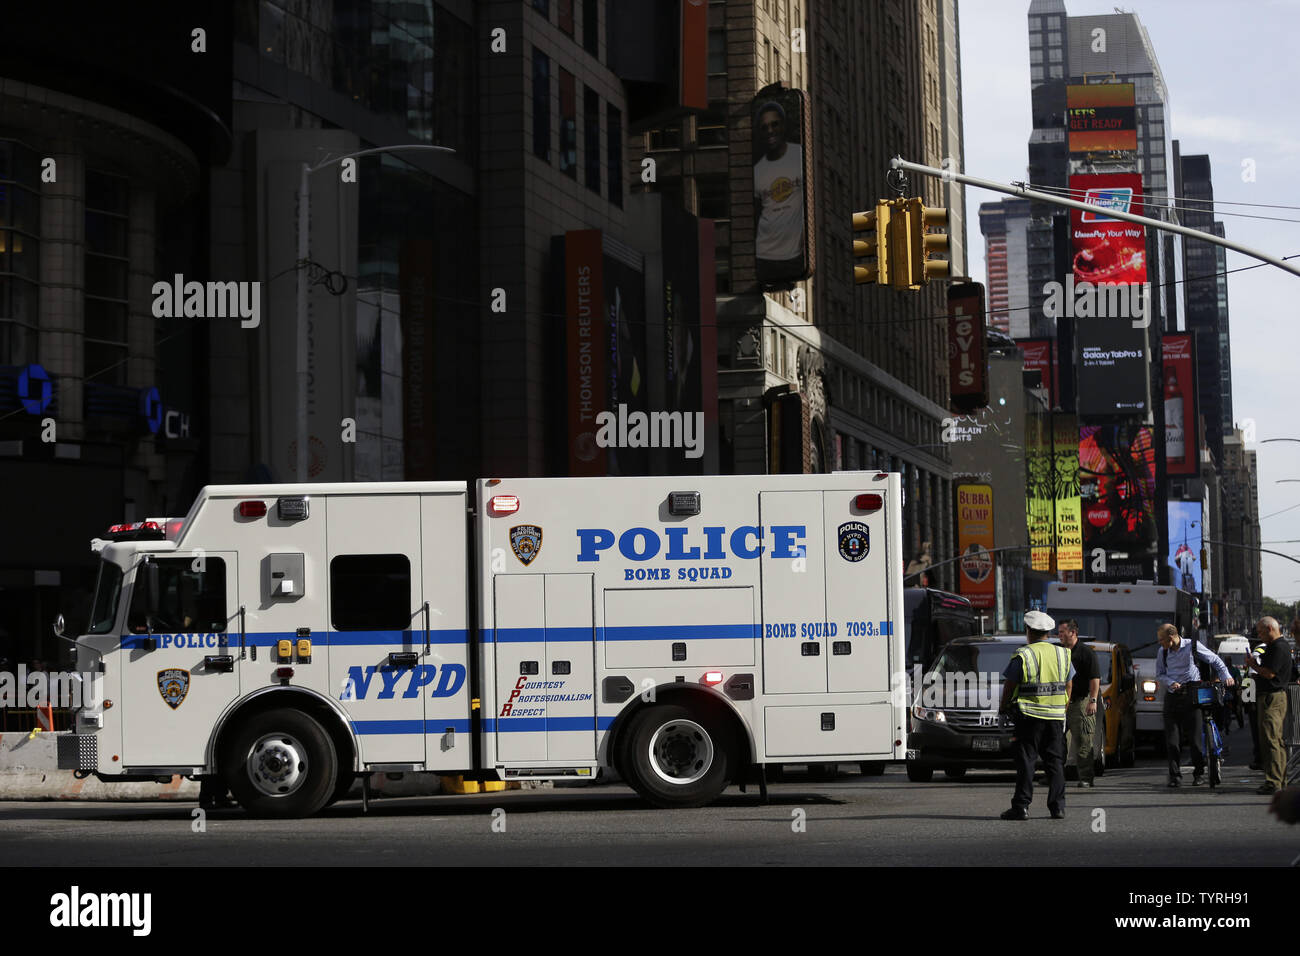 An NYPD bomb squad truck moves in Times Square after reports of a suspicious package sent police to the scene on September 21, 2016 in New York City. The package turned out to be an empty suitcase and the all clear was given shortly after. Tensions are still high days after an explosion from a bomb went off on West 23rd Street in Manhattan on Saturday, injuring 29 people, shattering windows and prompting widespread street closures on West 23rd Street.      Photo by John Angelillo/UPI Stock Photo